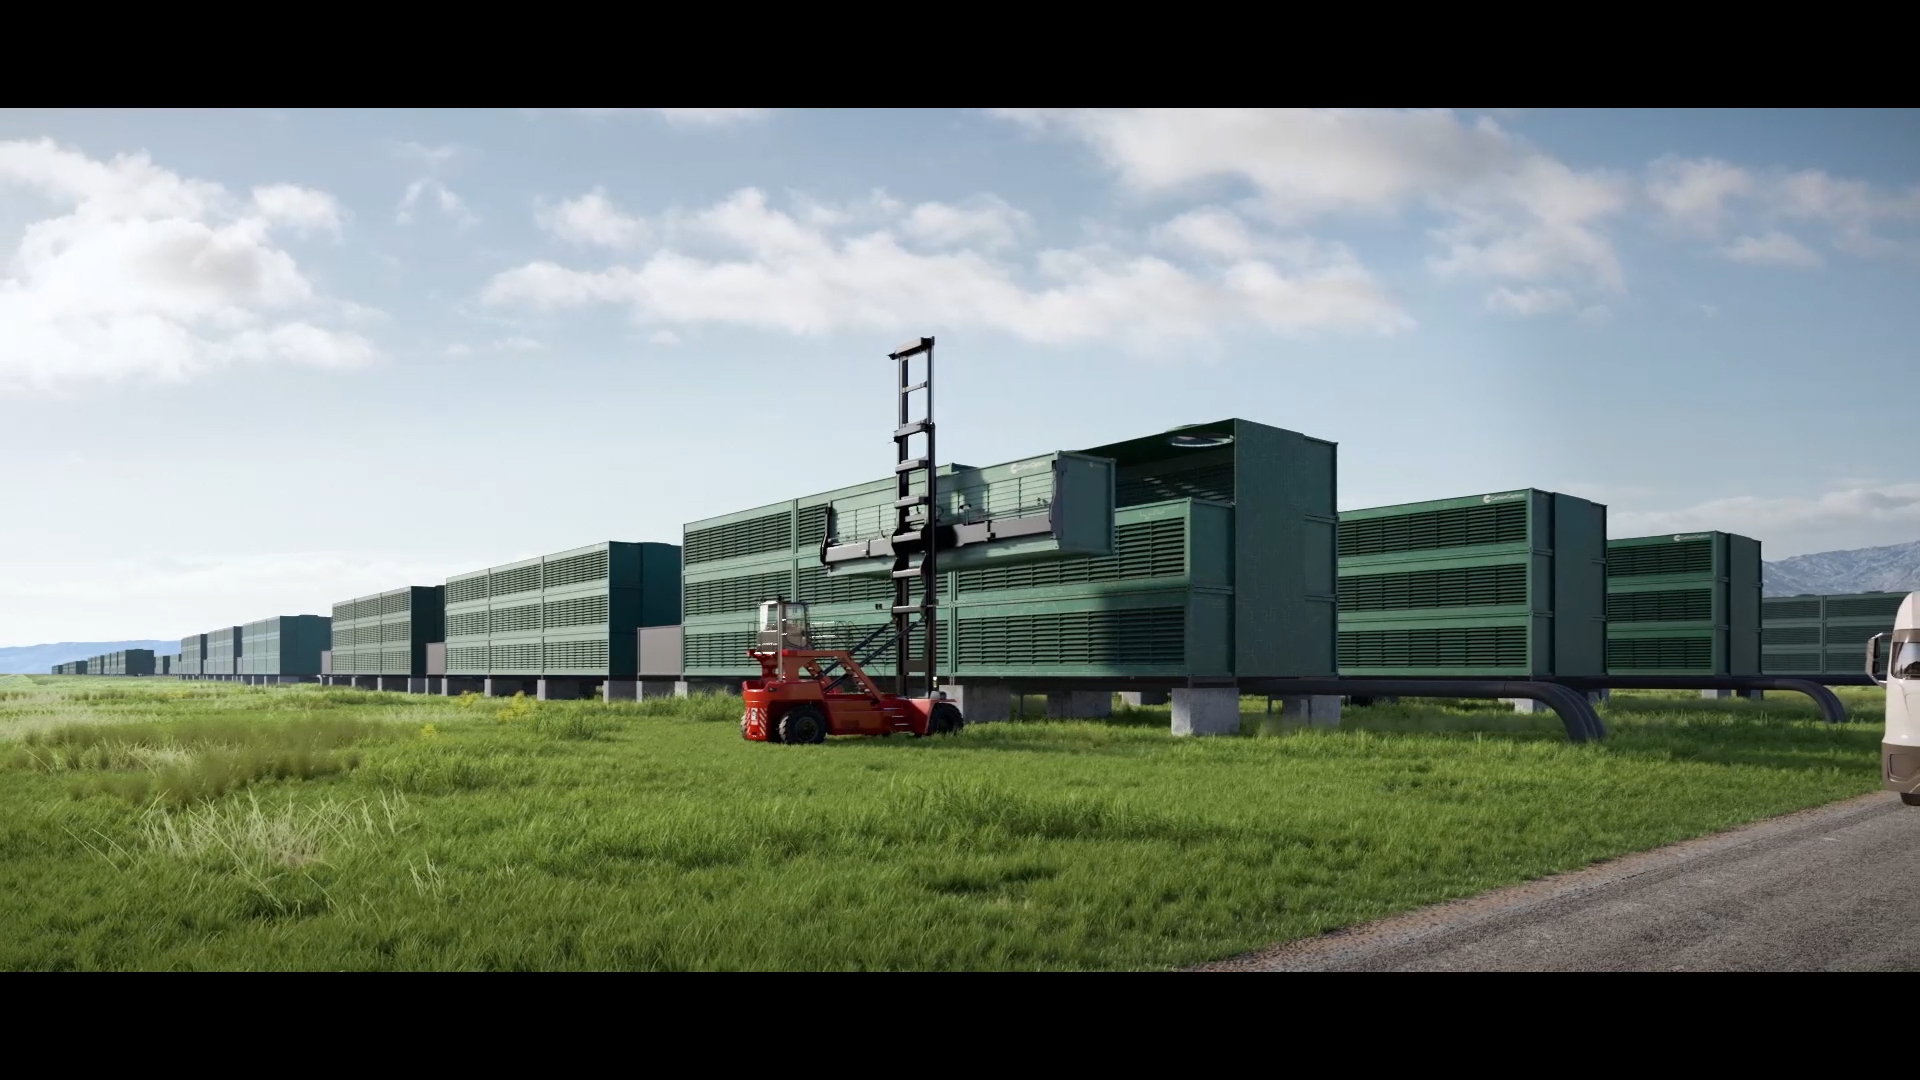 Video of CarbonCapture's modular direct air capture machines in a 5-megaton installation (rendering).